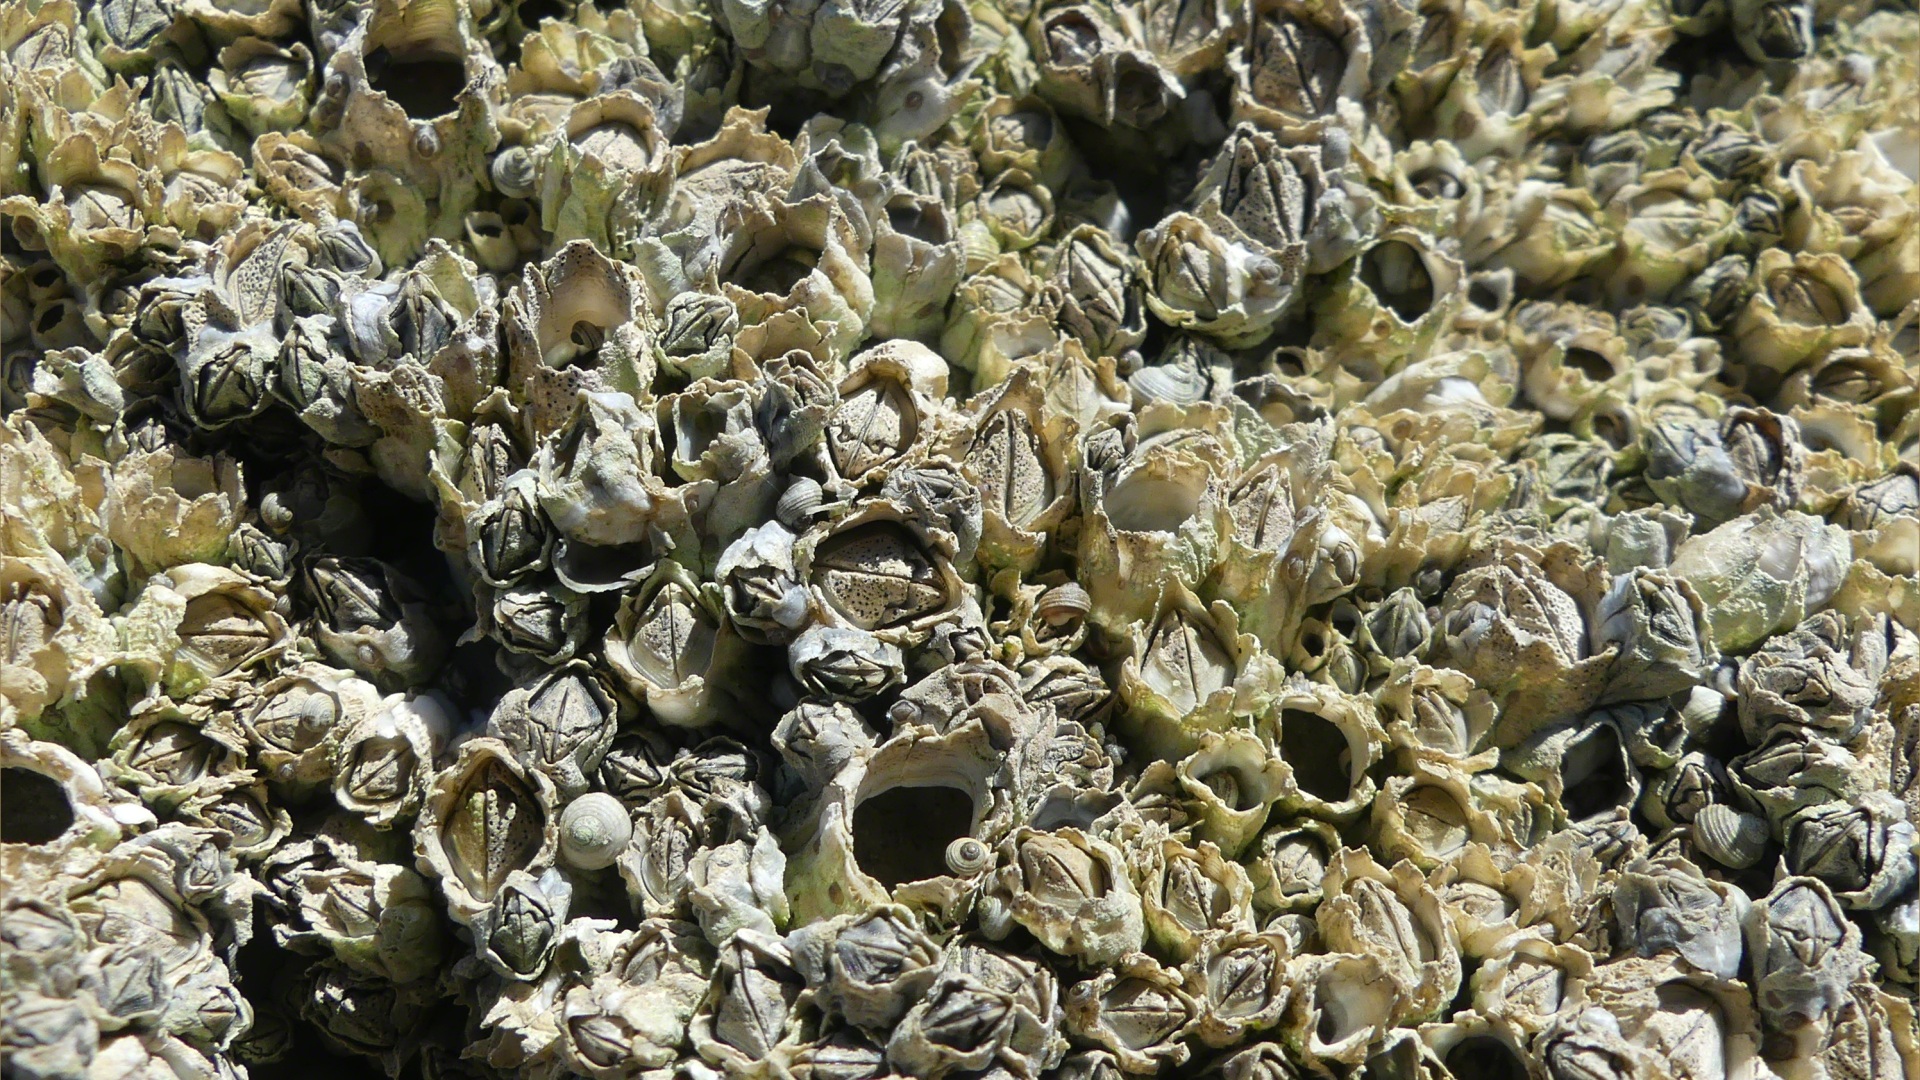 Successive generations of barnacles on rocks